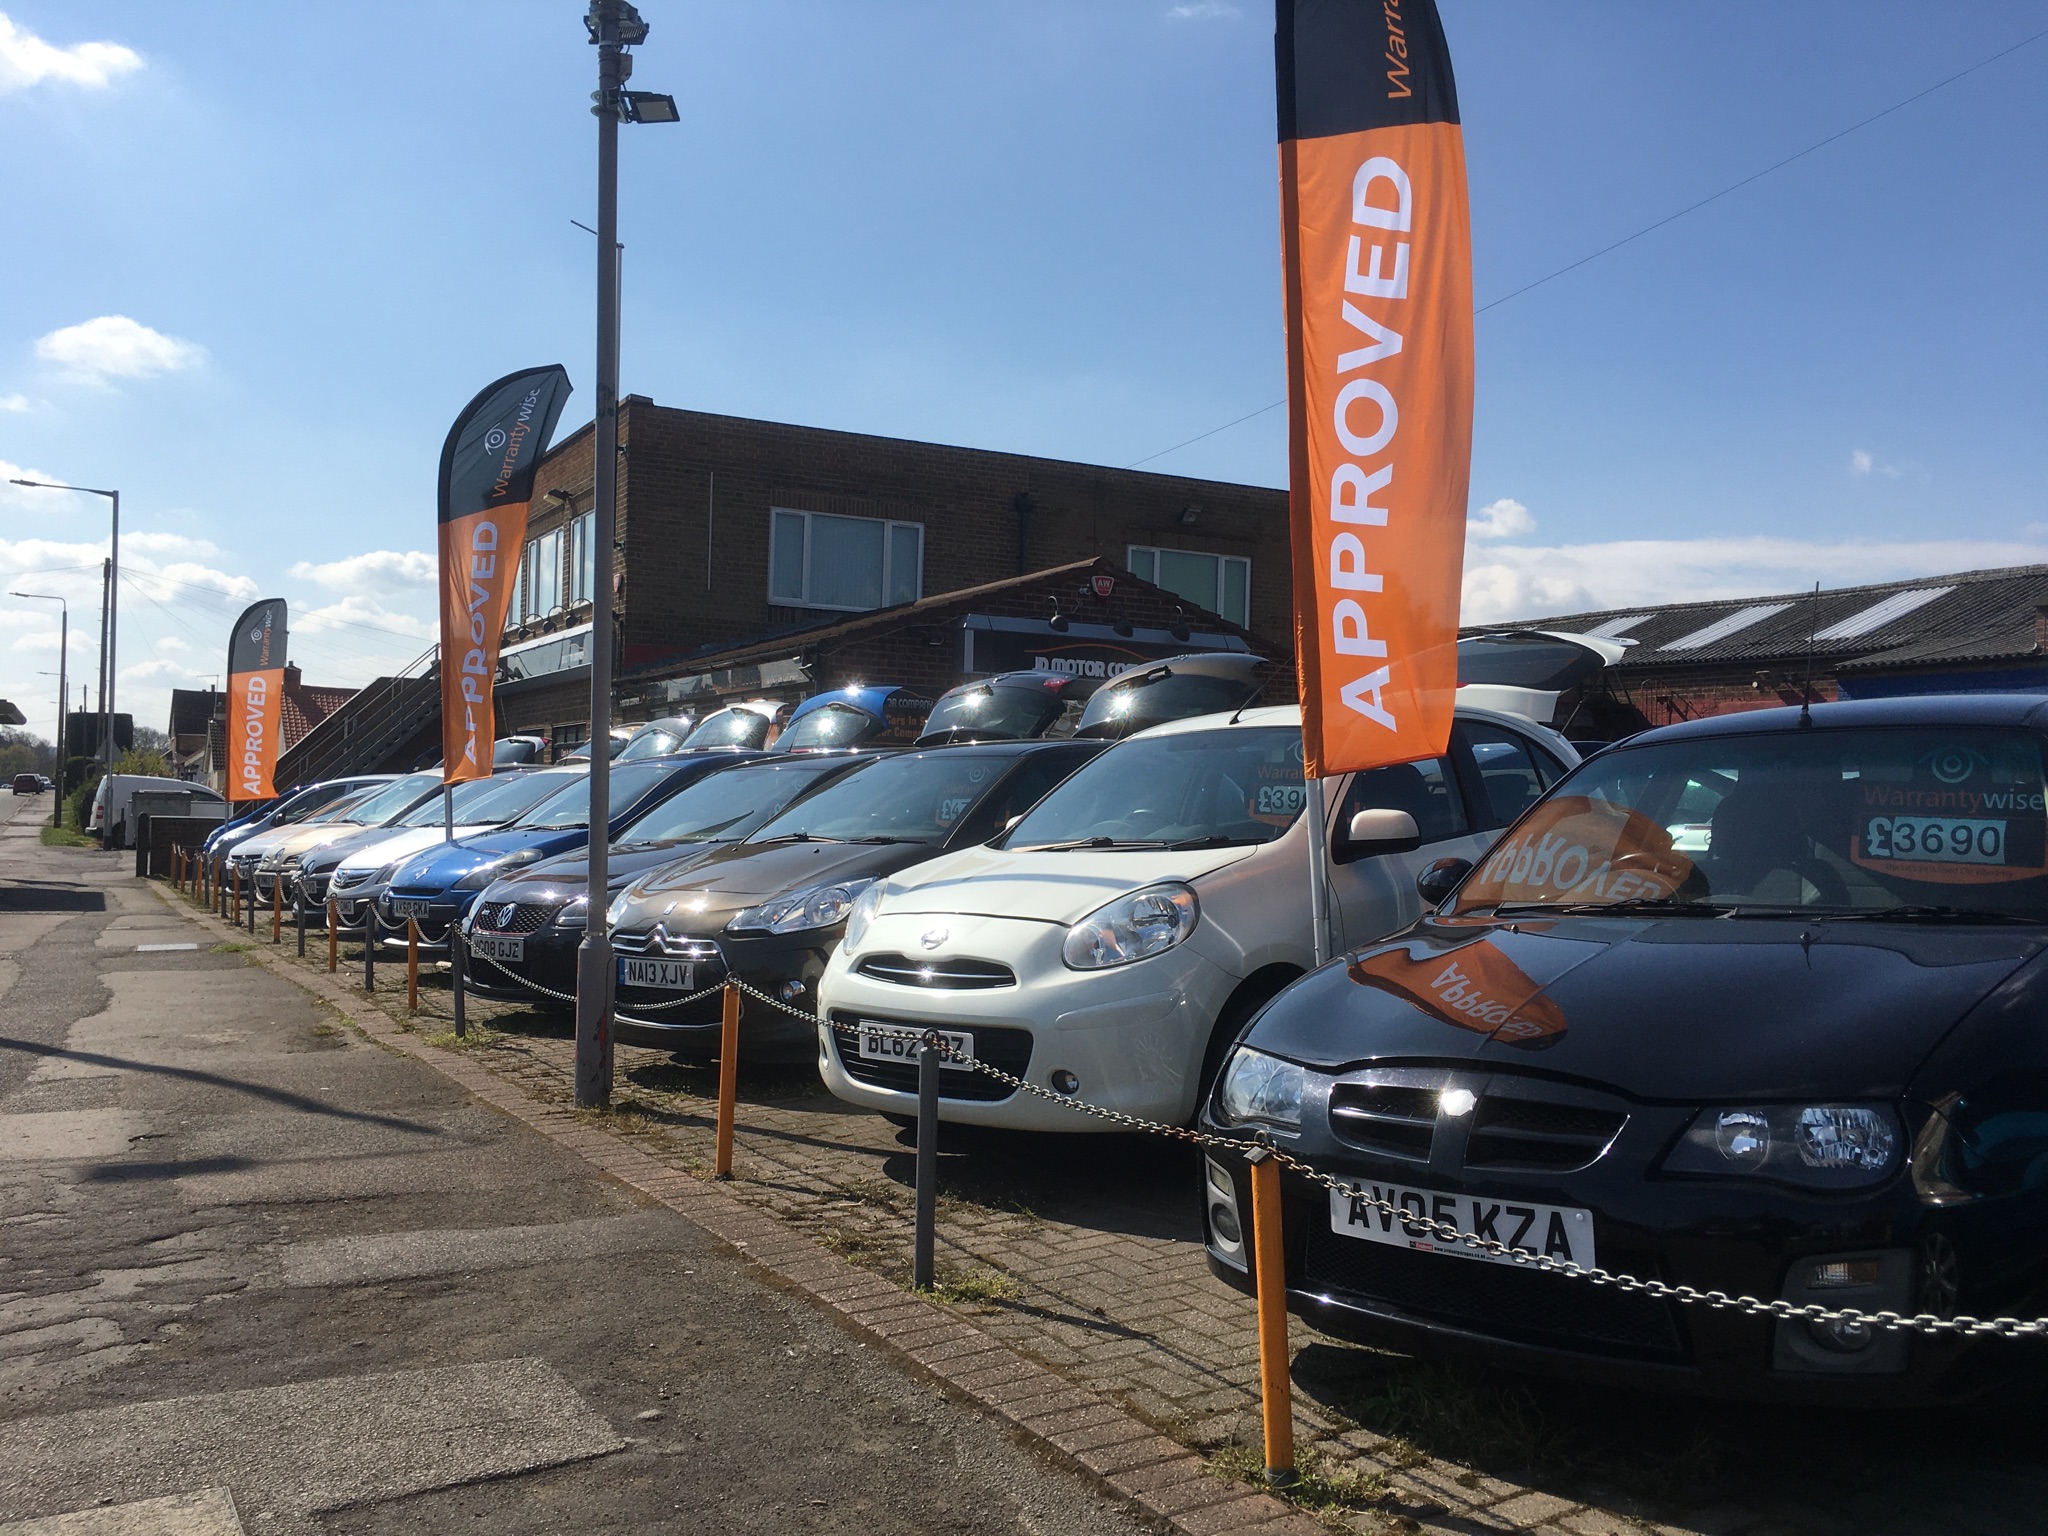 J D Motor Company | Car dealership in Chilwell | AutoTrader